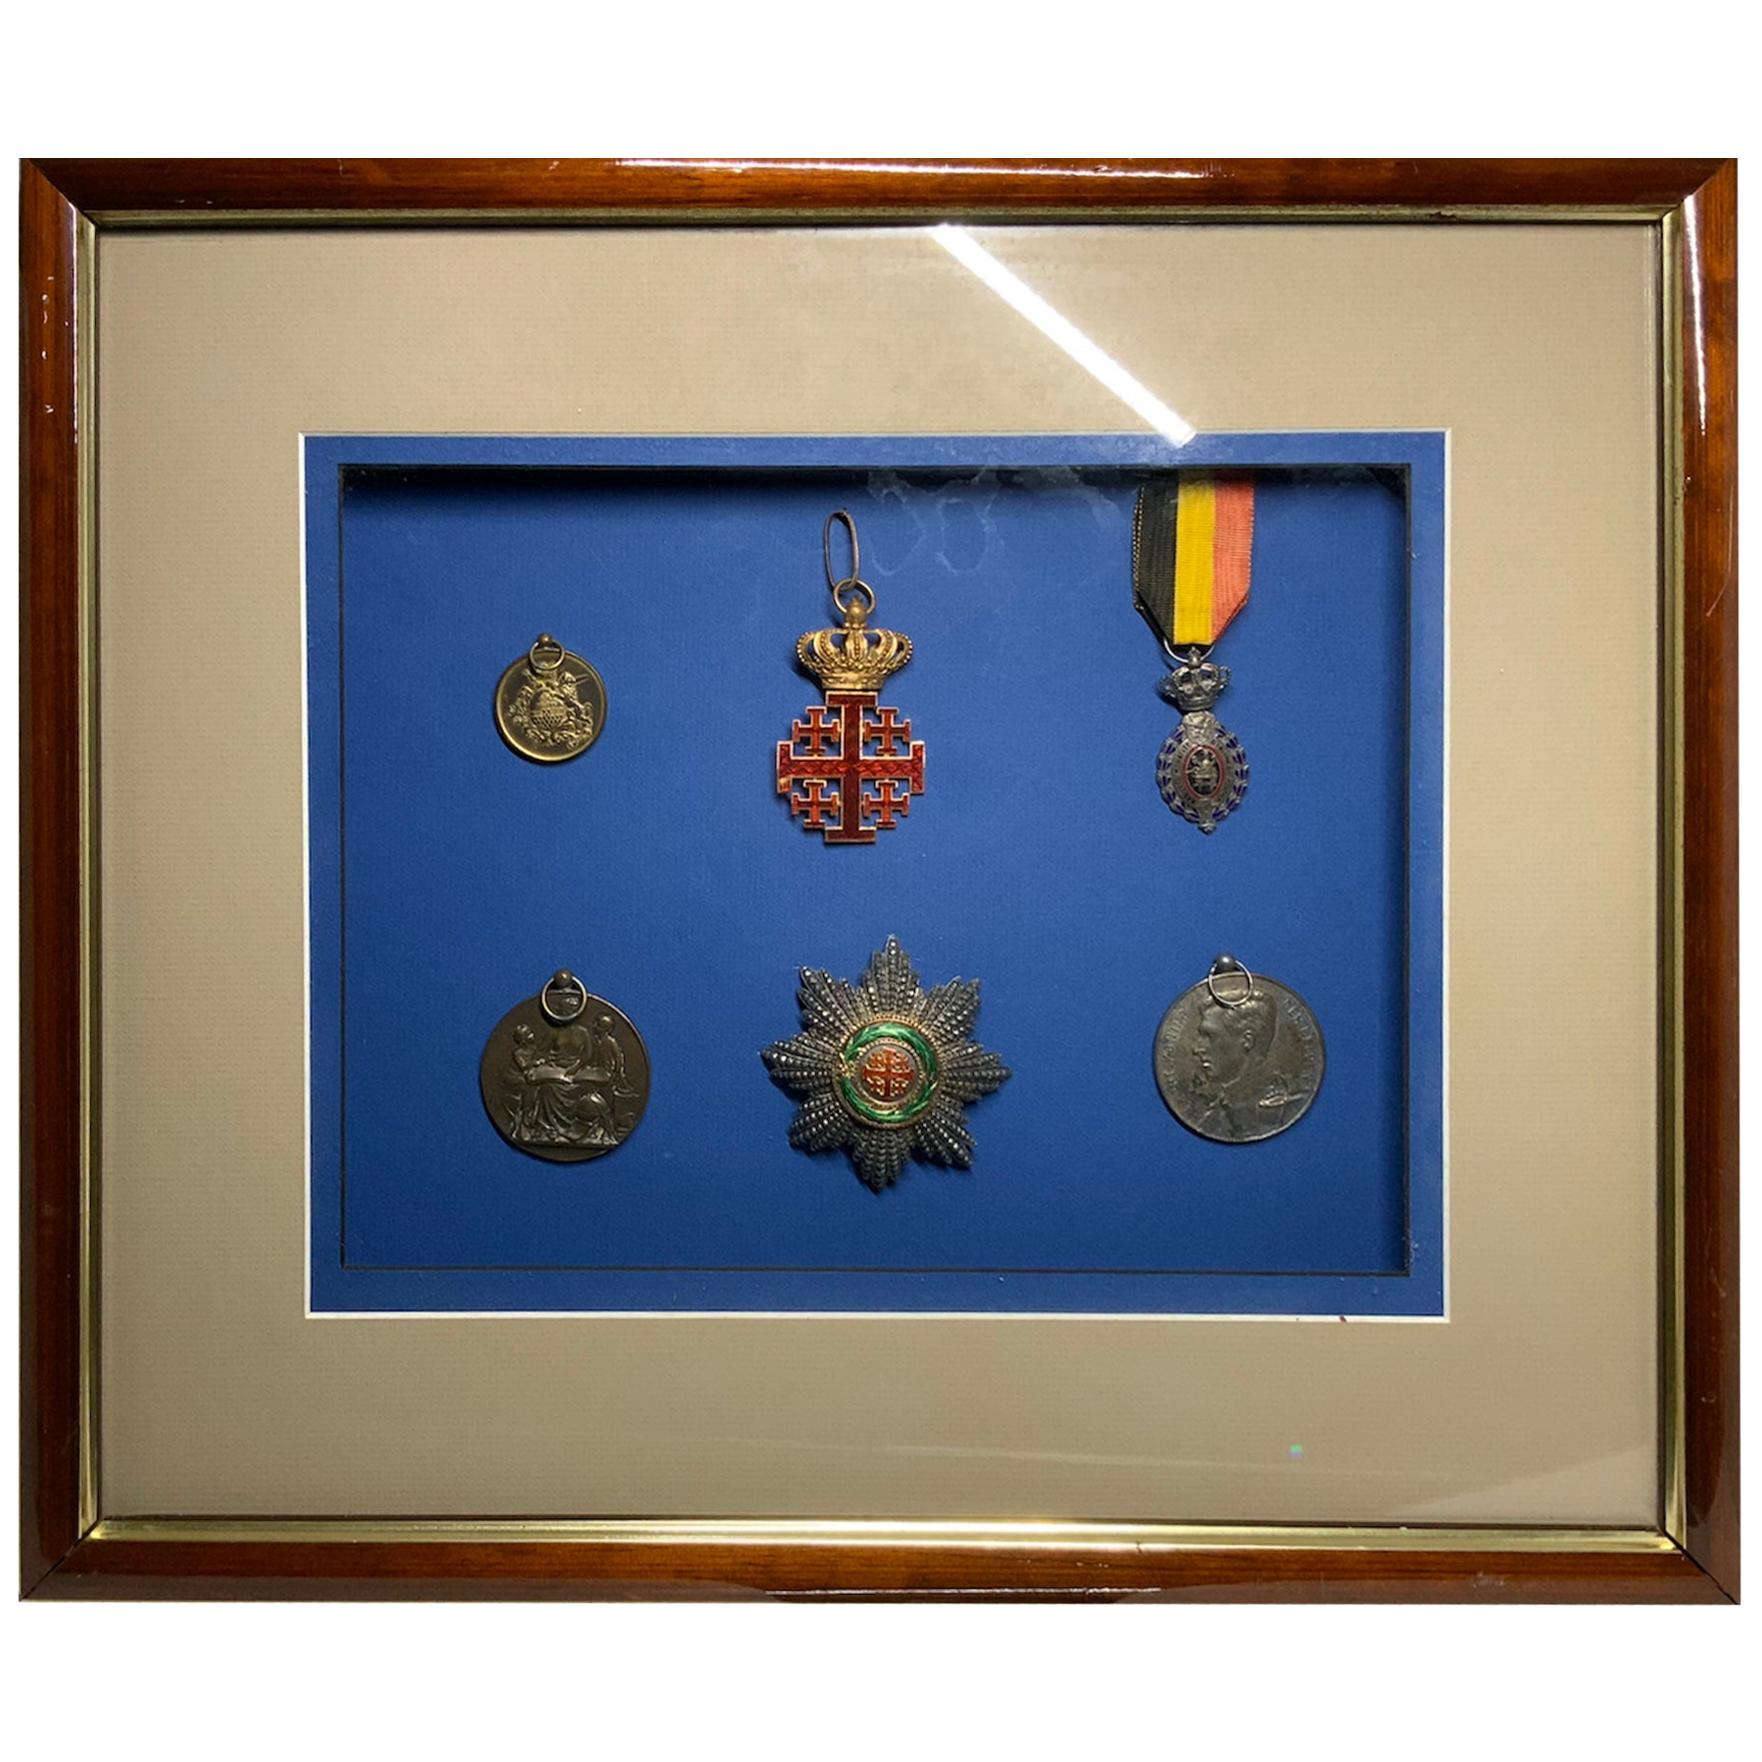 Framed Wood Display of Orders, Medals and Decorations